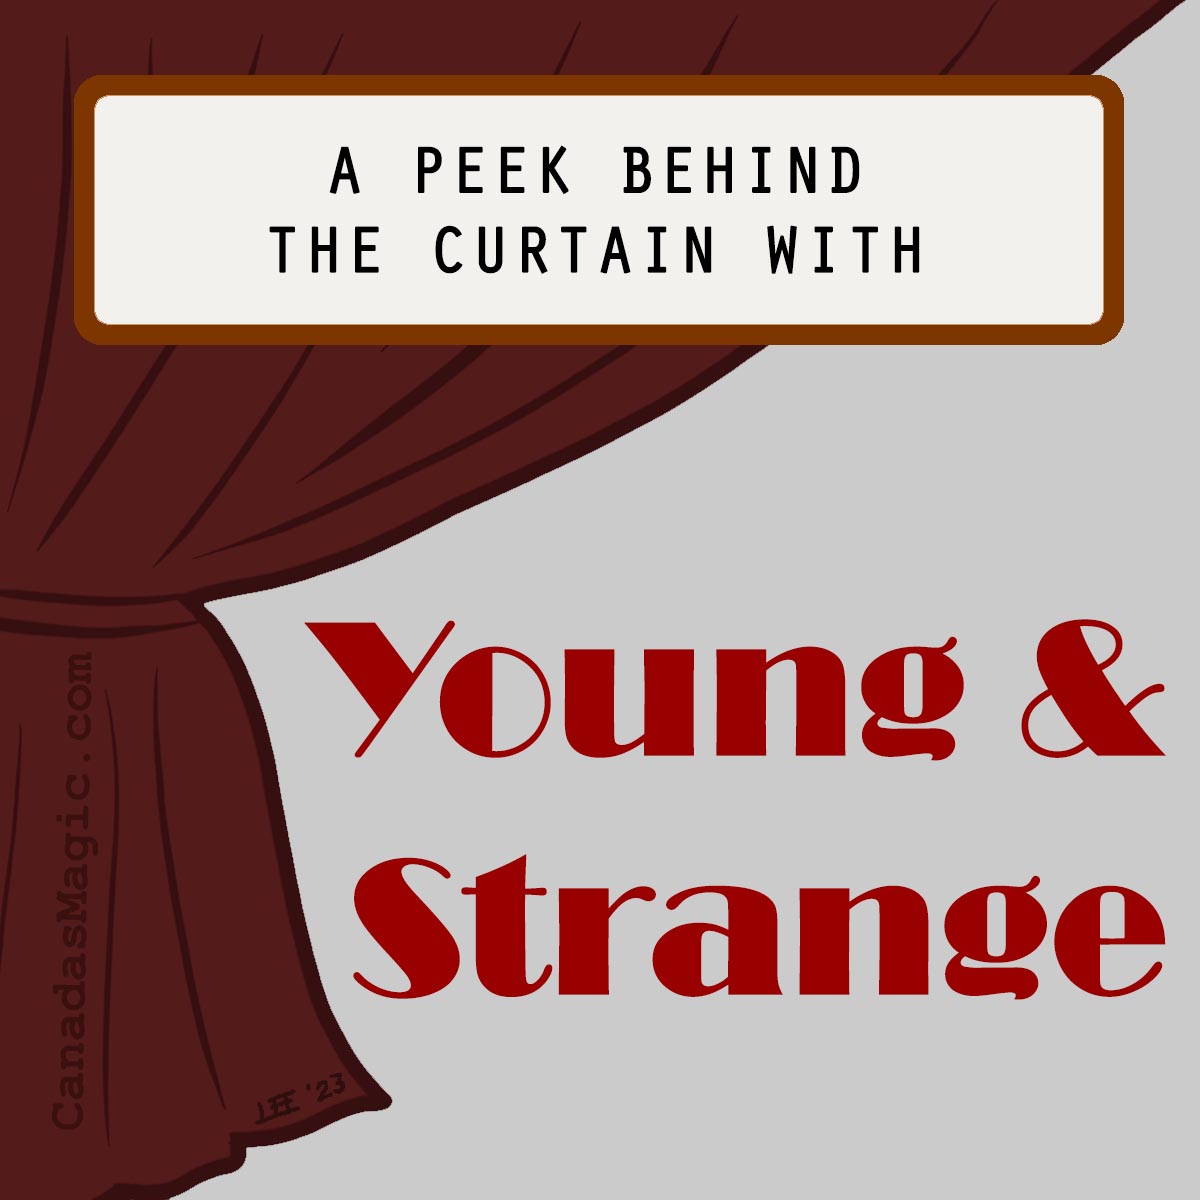 A peek behind the curtain with Young and Strange